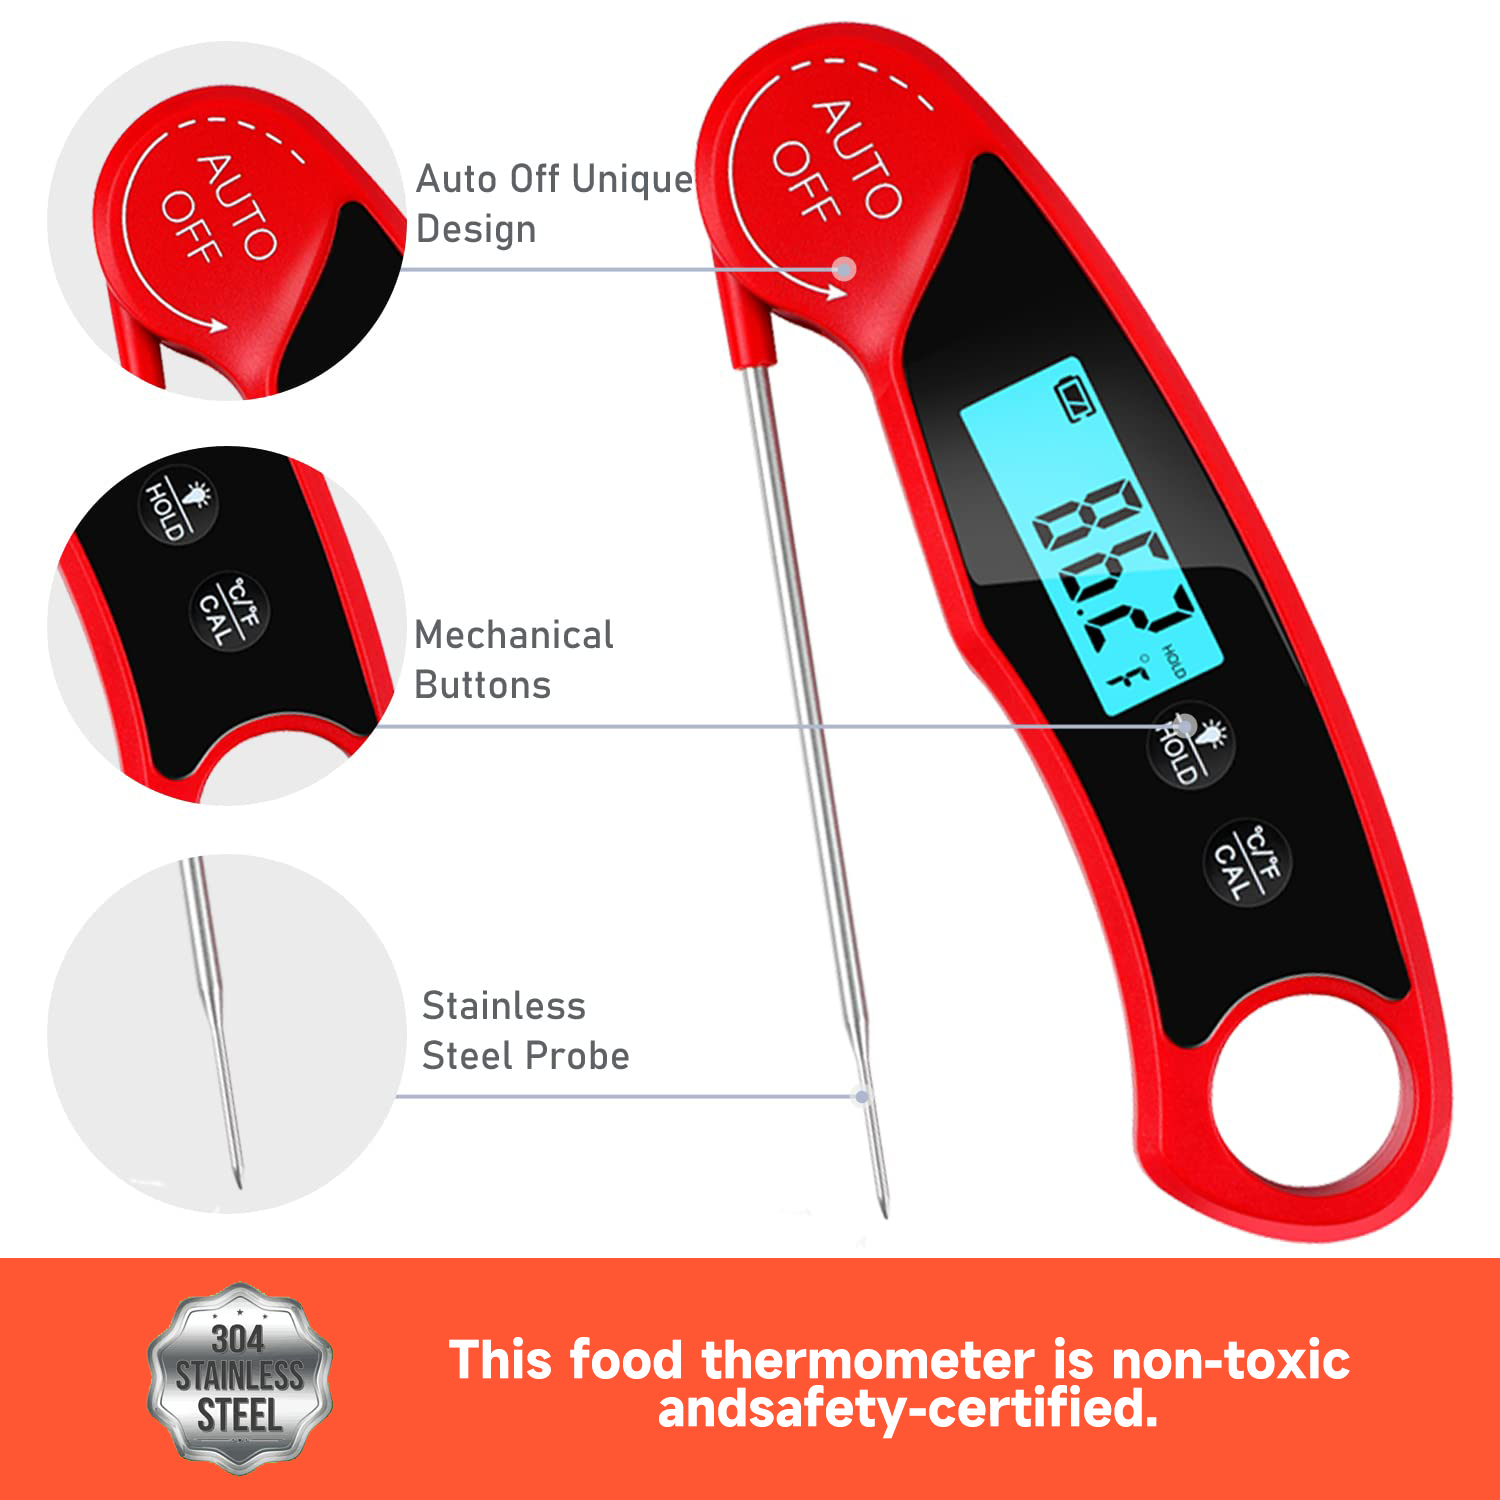 Listime® Meat Thermometer with Bluetooth,100ft Wireless